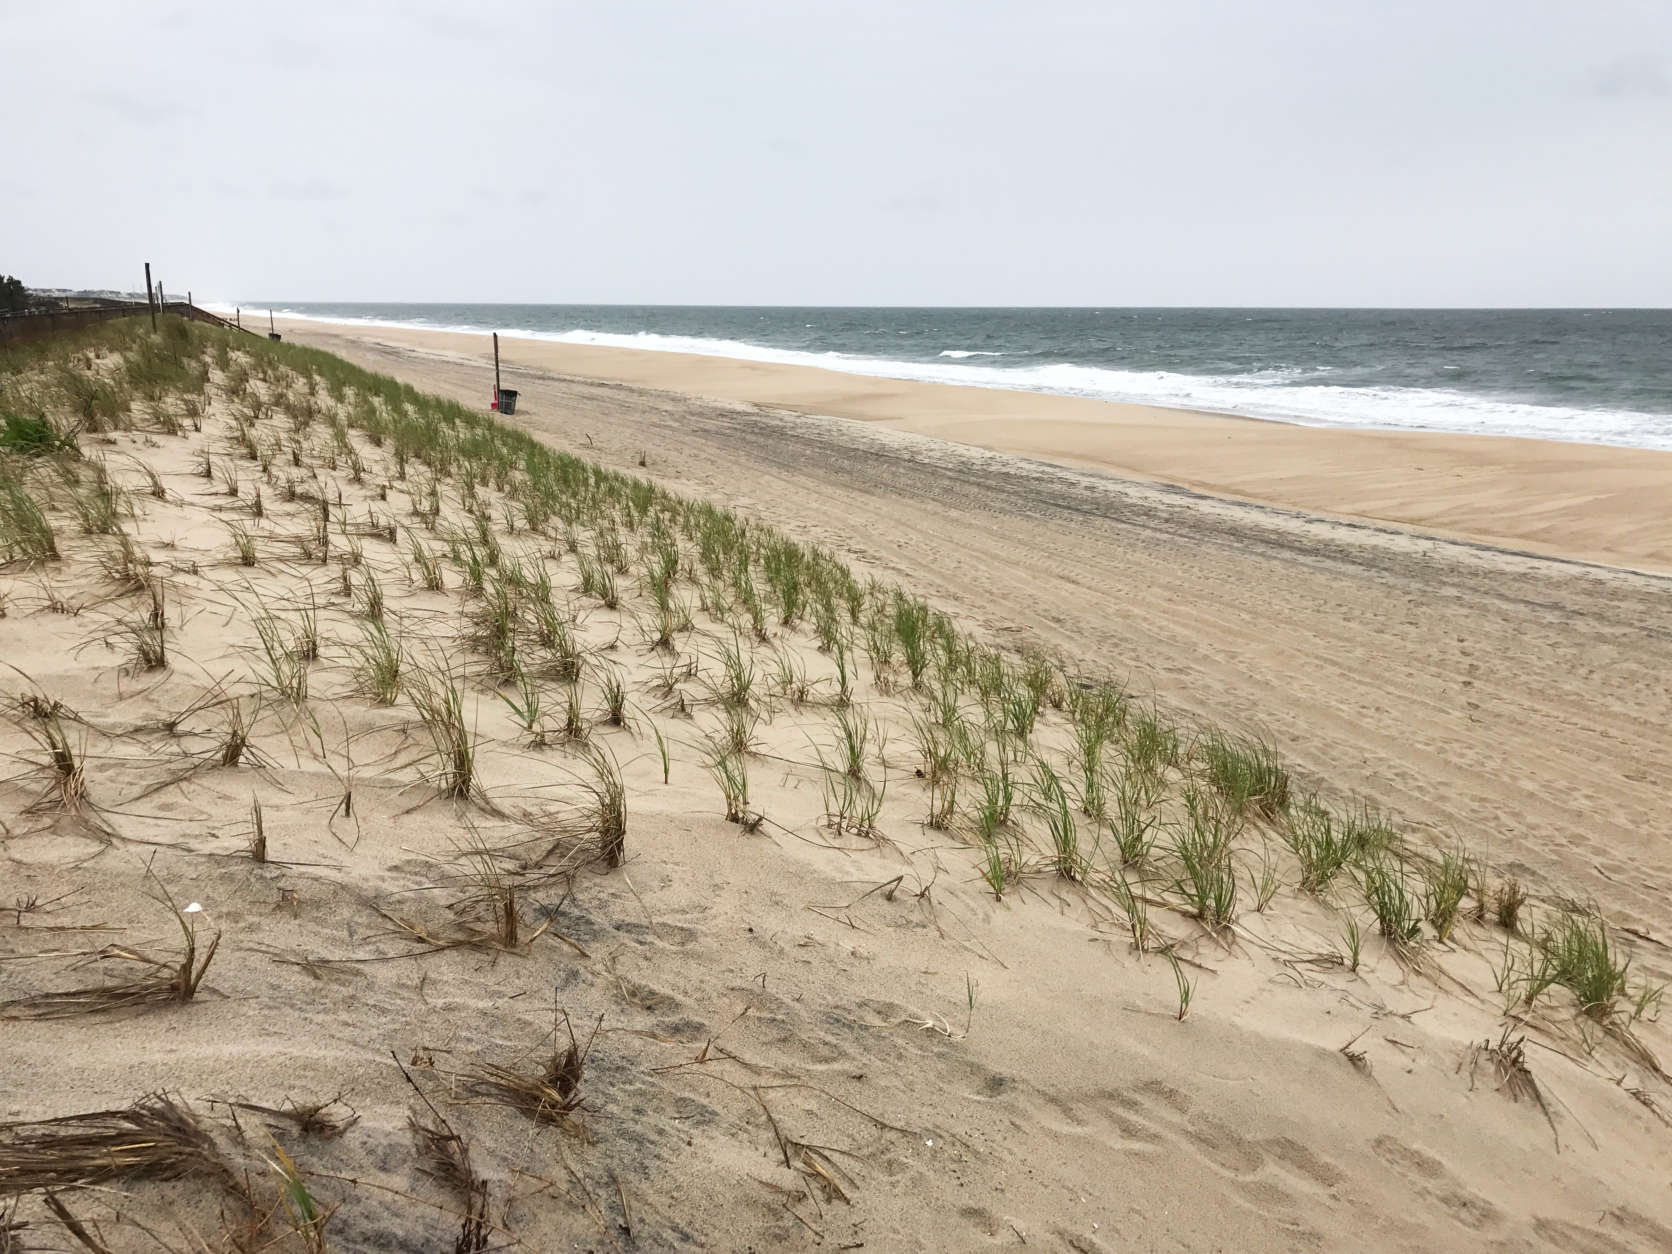 Those looking for a break from Beltway commutes and the commotion of the city retreat to Bethany Beach, where bike cruisers dominate the roads and the chime of emails are drowned out by the sound of crashing waves. (WTOP/Megan Cloherty)